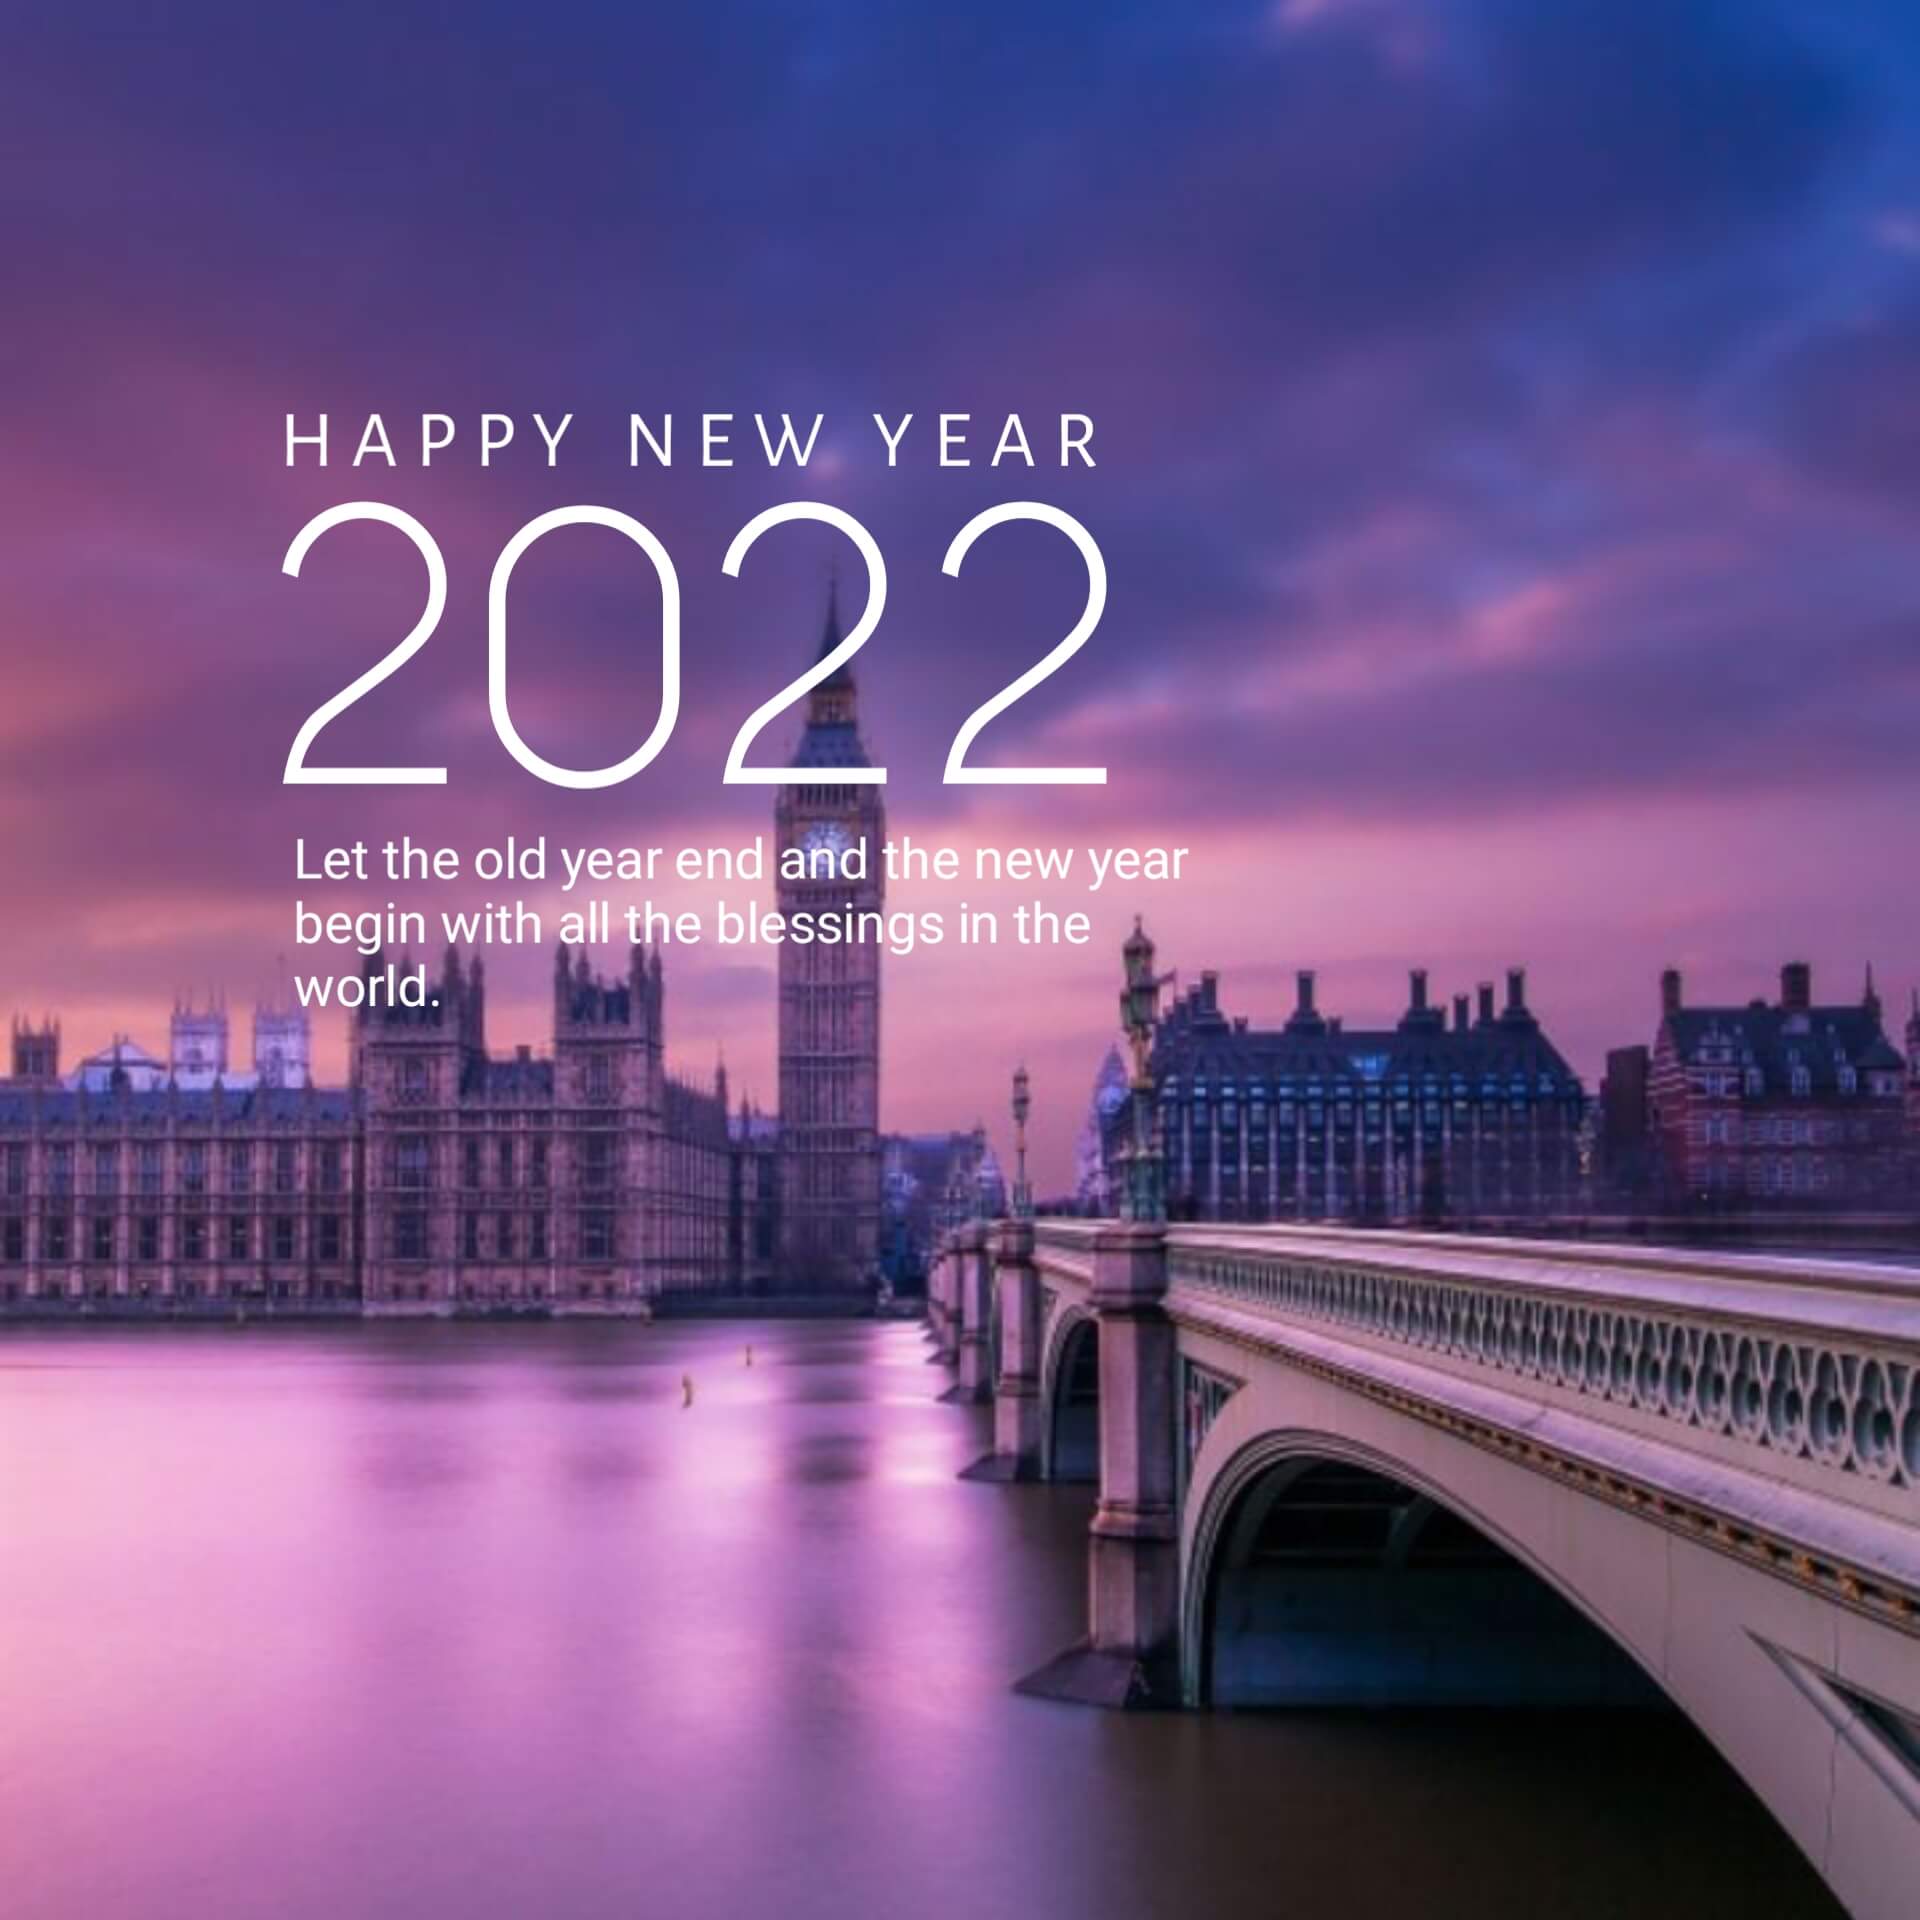 New Year 2022 Wishes Images